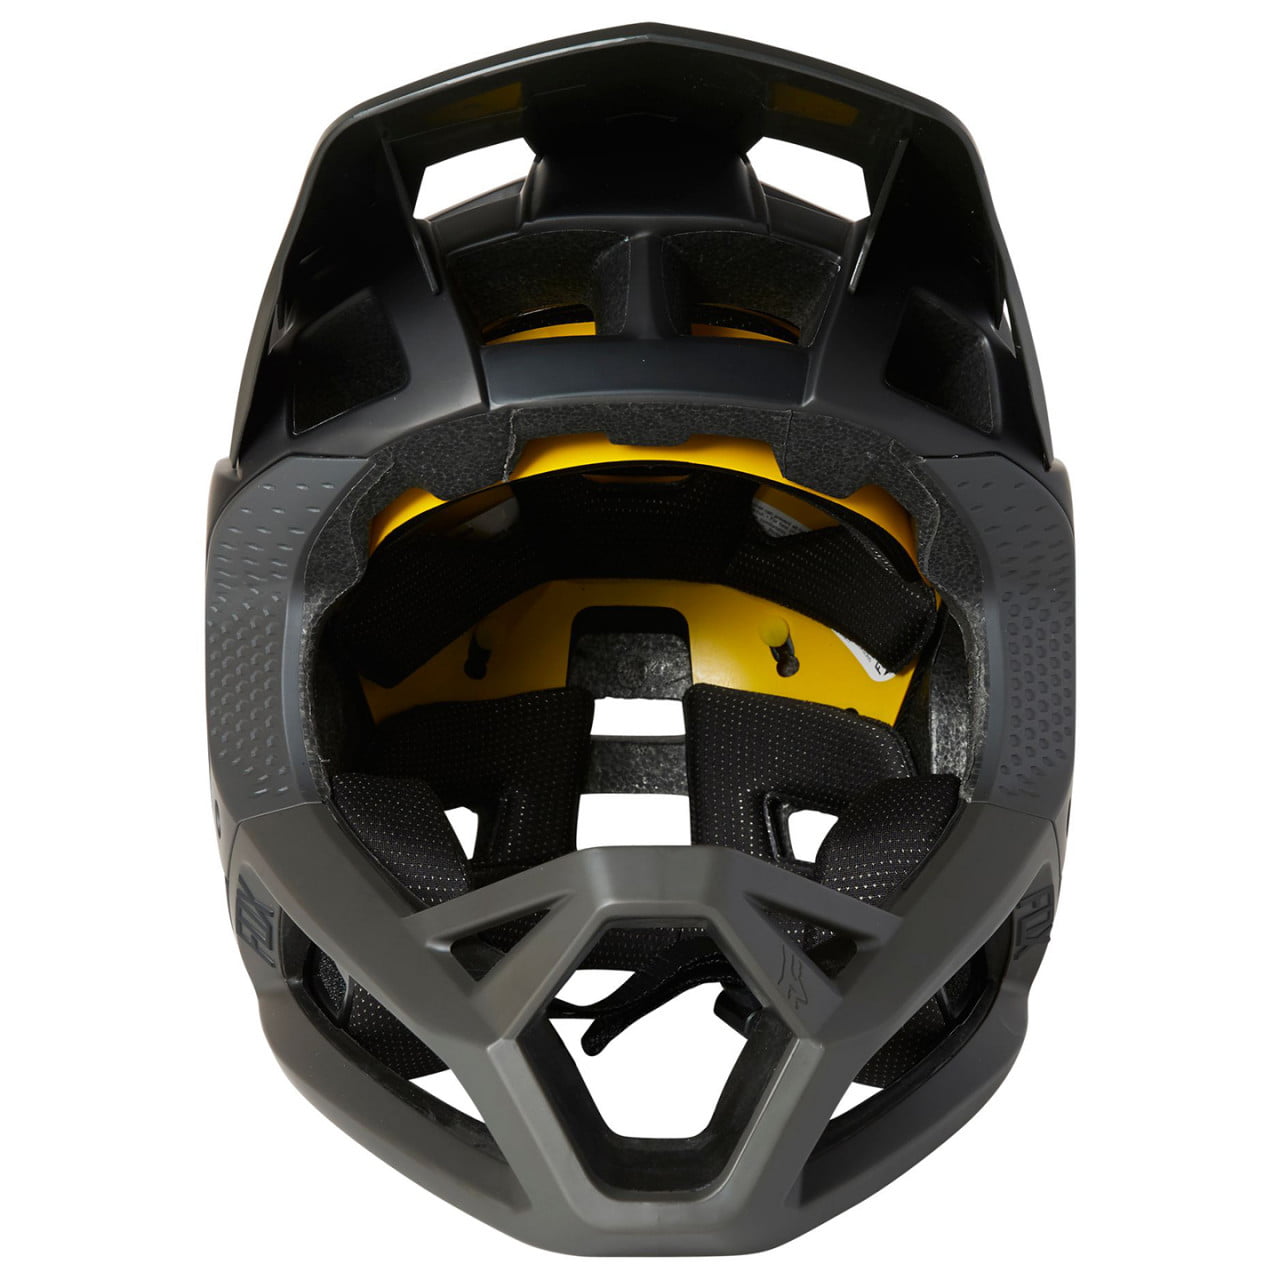 Proframe Mips Full Face Cycling Helmet